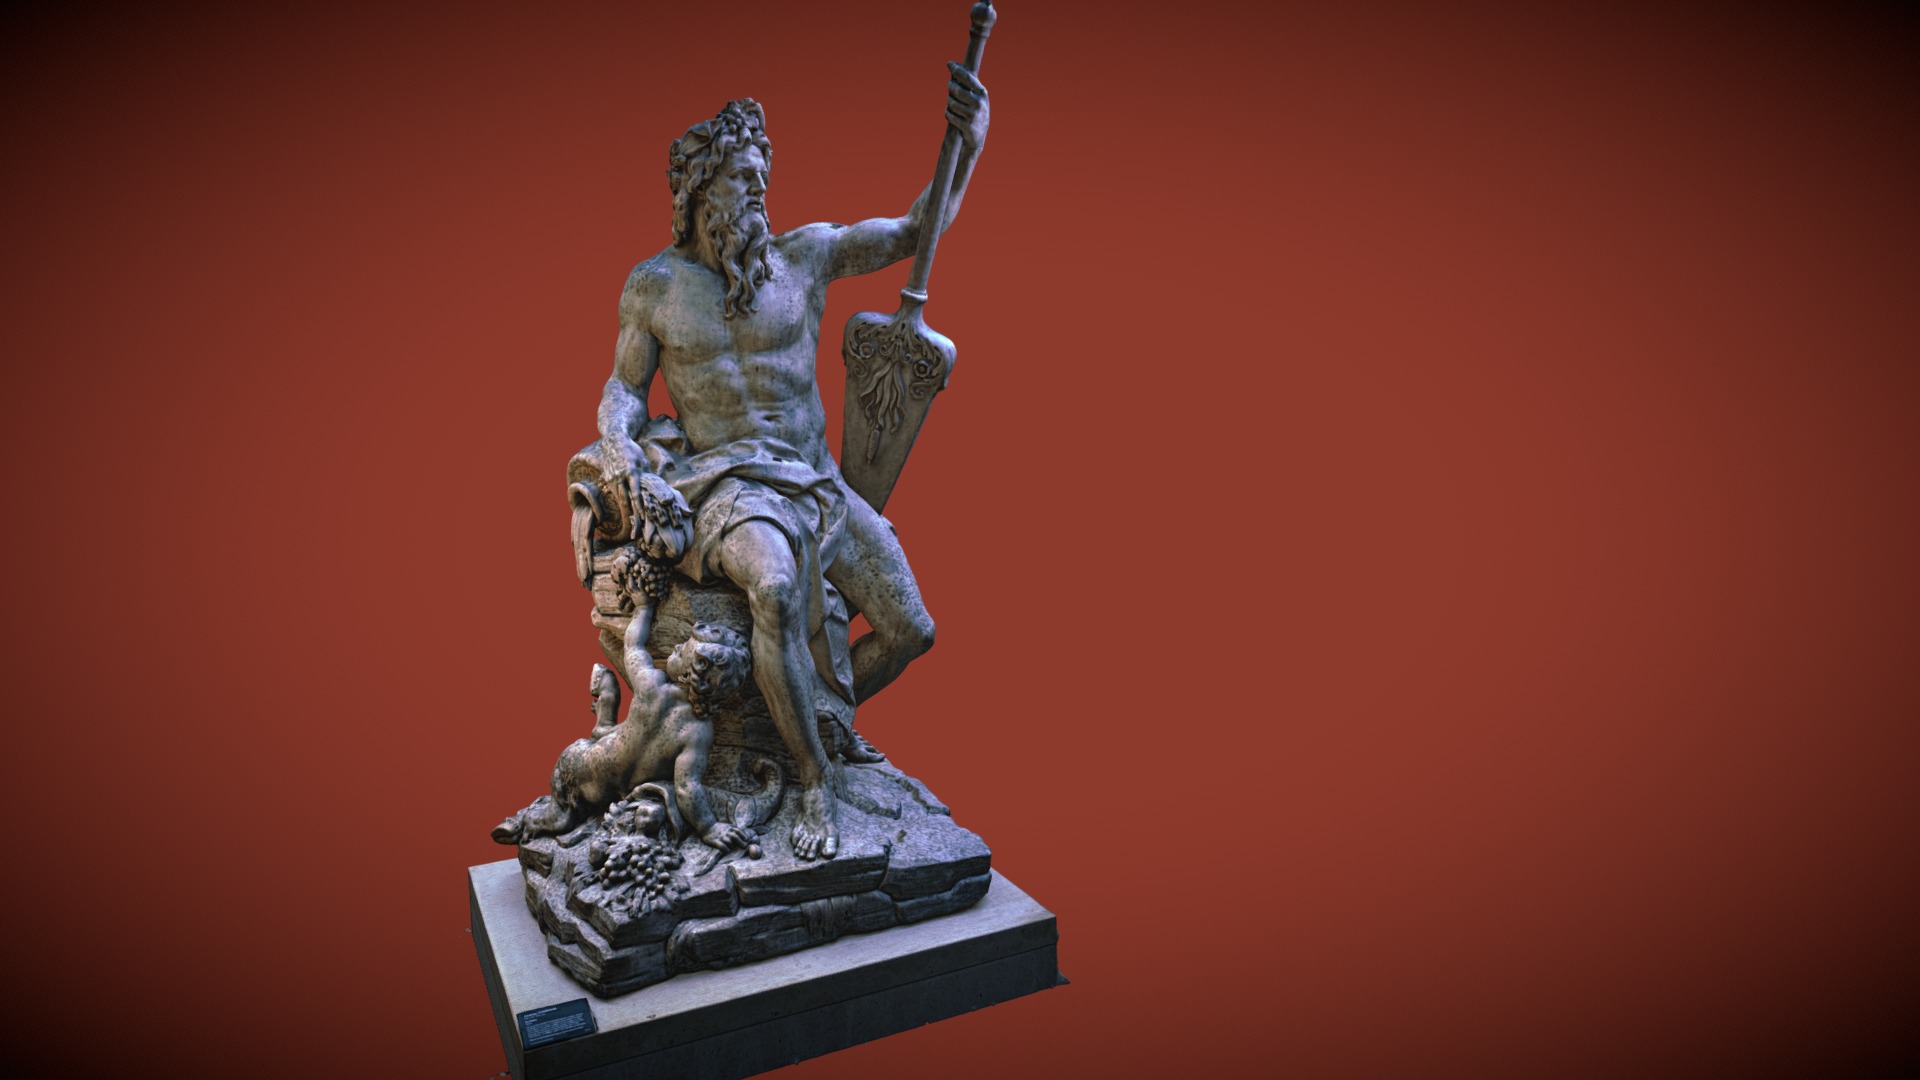 3D model La Seine by Antoine Coysevox, Louvre Museum - This is a 3D model of the La Seine by Antoine Coysevox, Louvre Museum. The 3D model is about a statue of a person holding a staff.